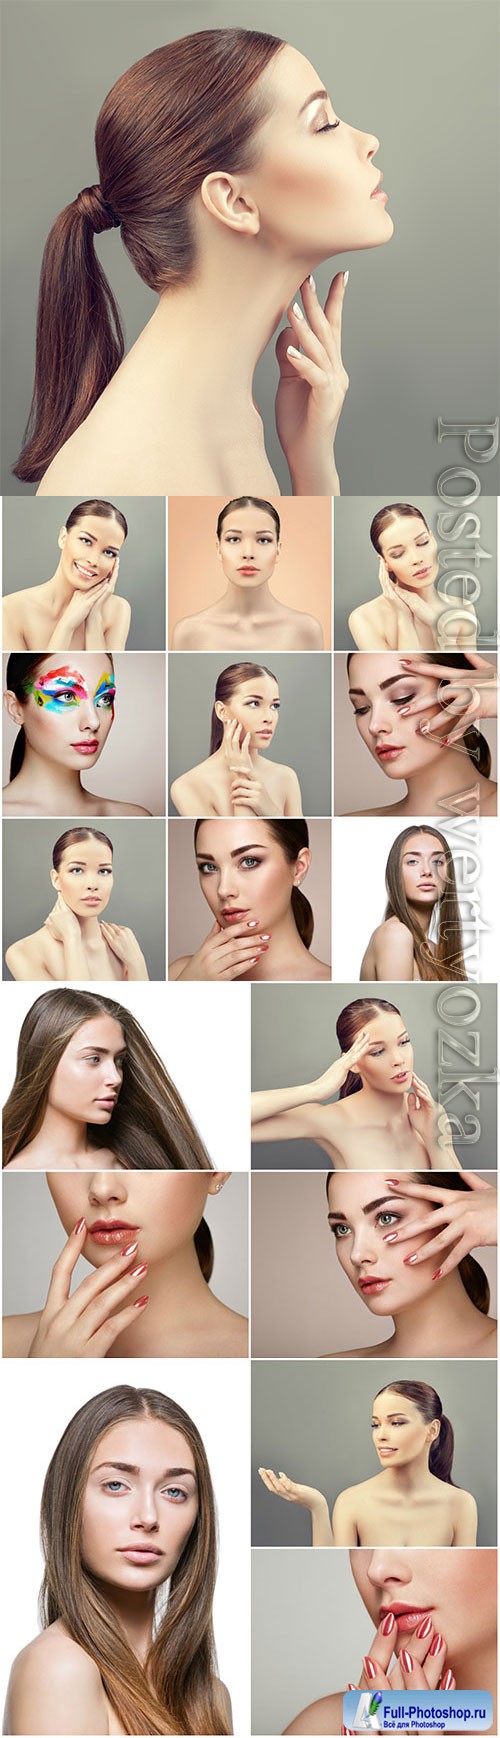 Beautiful well groomed young women stock photo